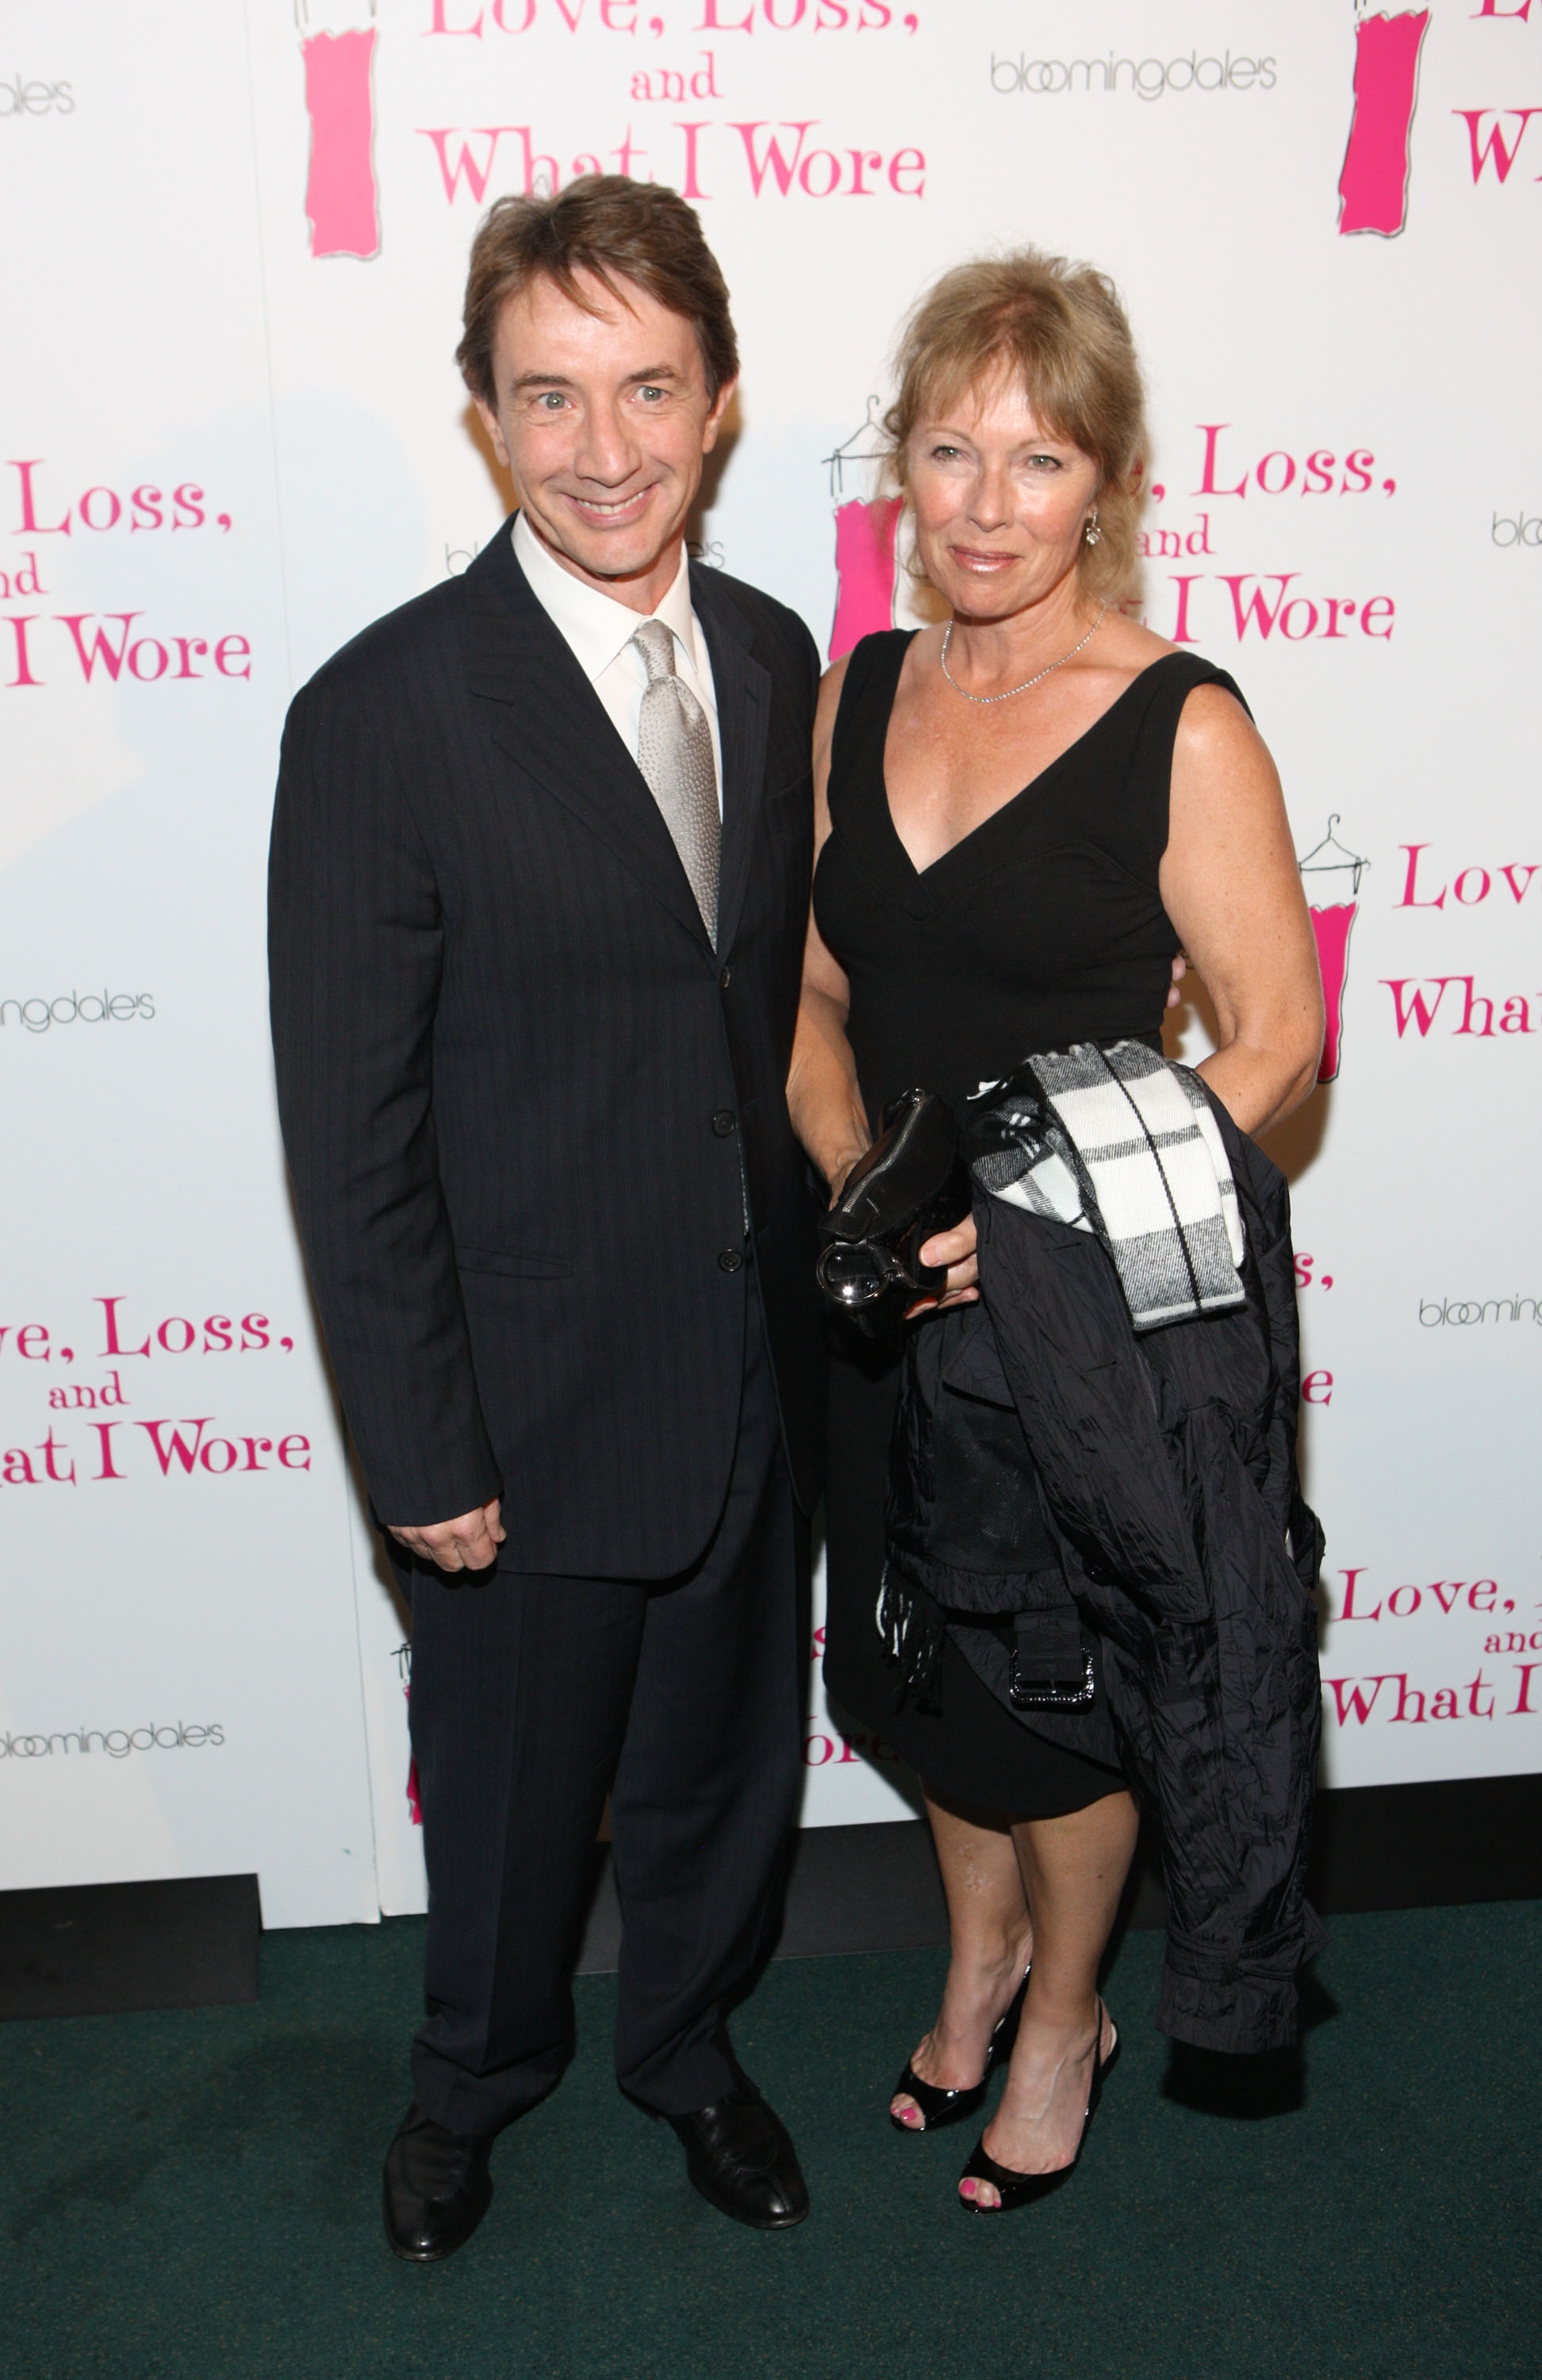 Martin Short and wife Nancy Short attend the after party for the opening night of "Love, Loss and What I Wore" at Bryant Park Grill on October 1, 2009, in New York City. | Source: Getty Images